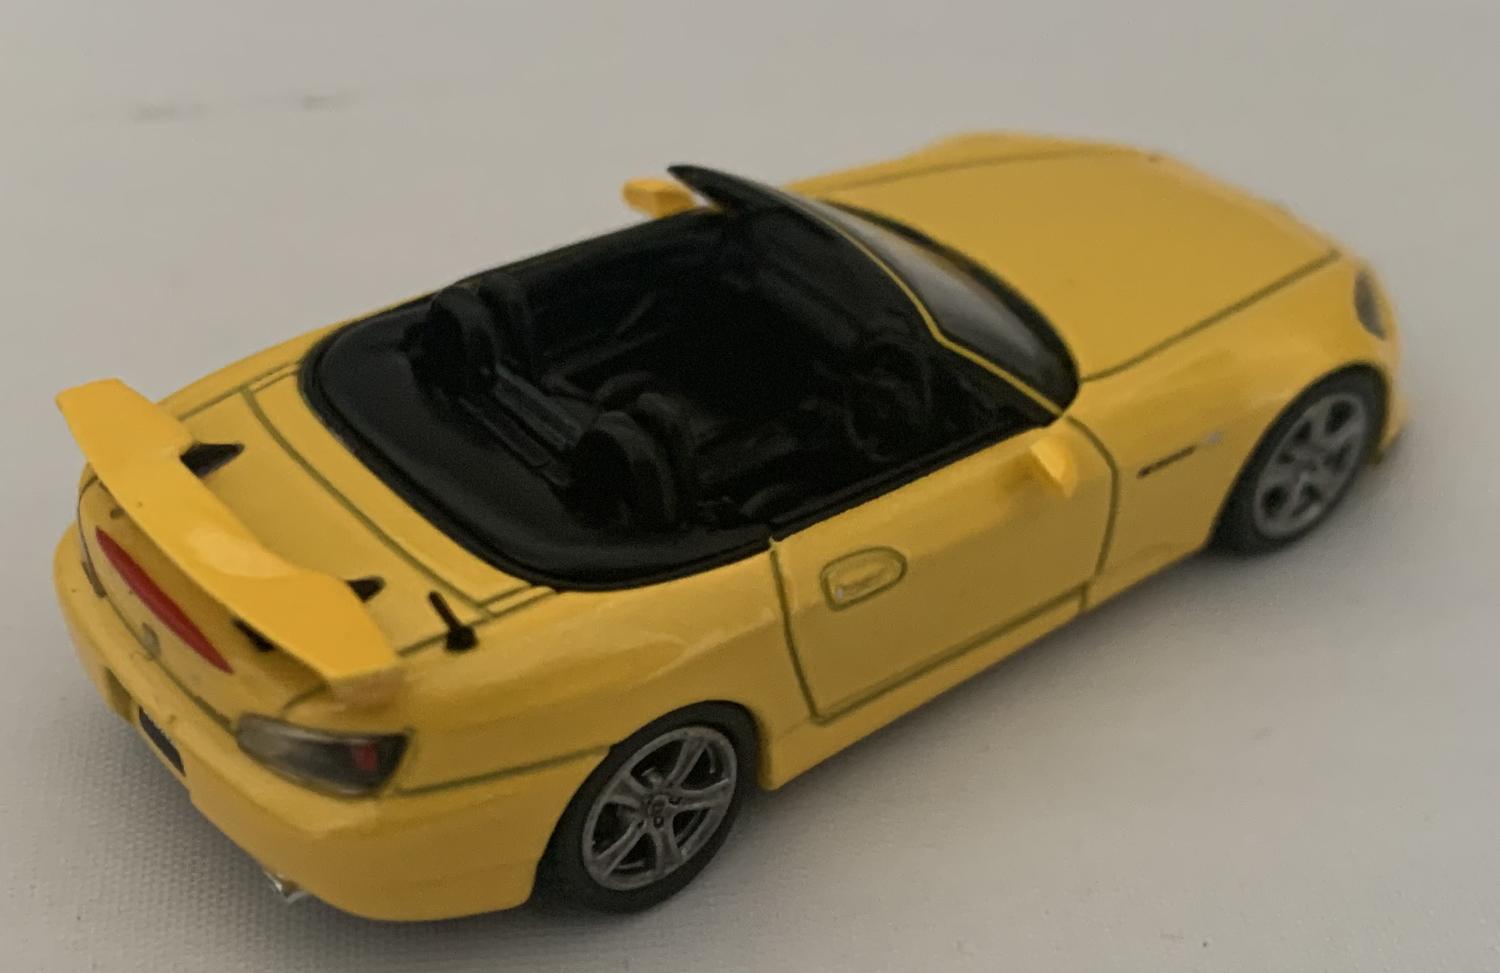 Honda S2000 Type S in new indy yellow pearl 1:64 scale model from Mini GT